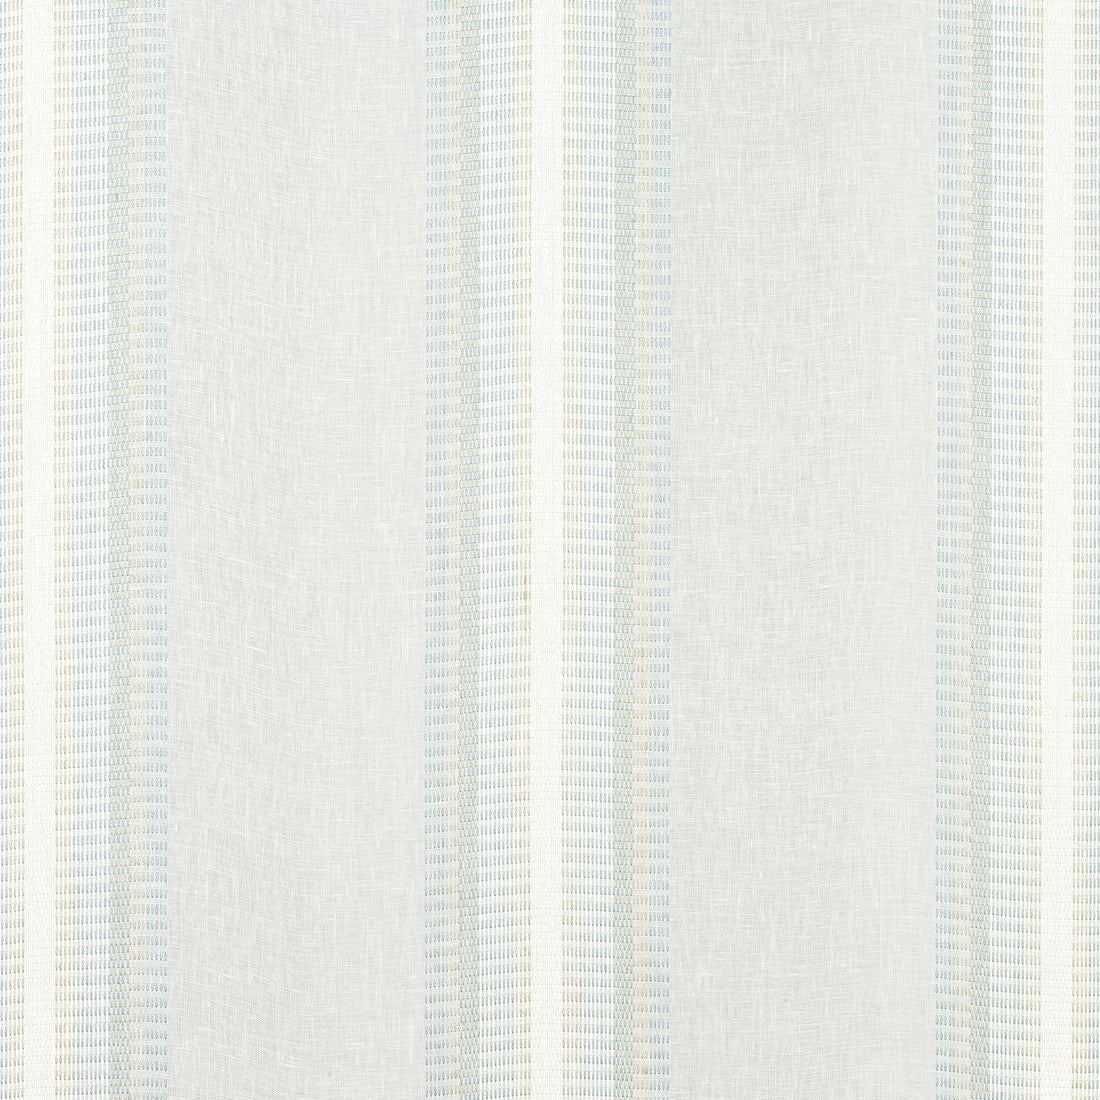 Brampton Stripe fabric in spa blue color - pattern number FWW7165 - by Thibaut in the Atmosphere collection